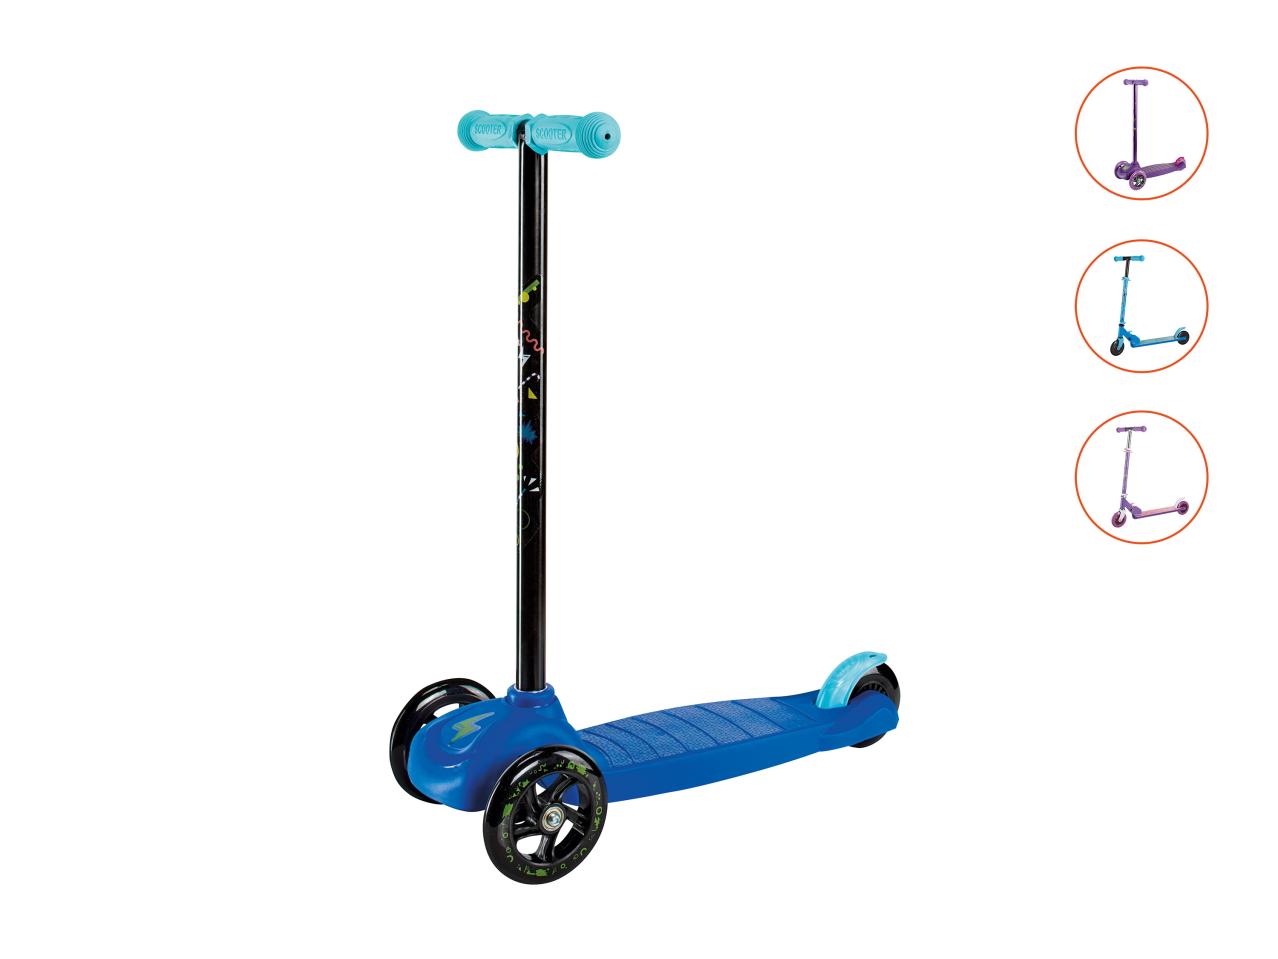 Playtive Junior Kids' Scooter or Tri-Scooter1